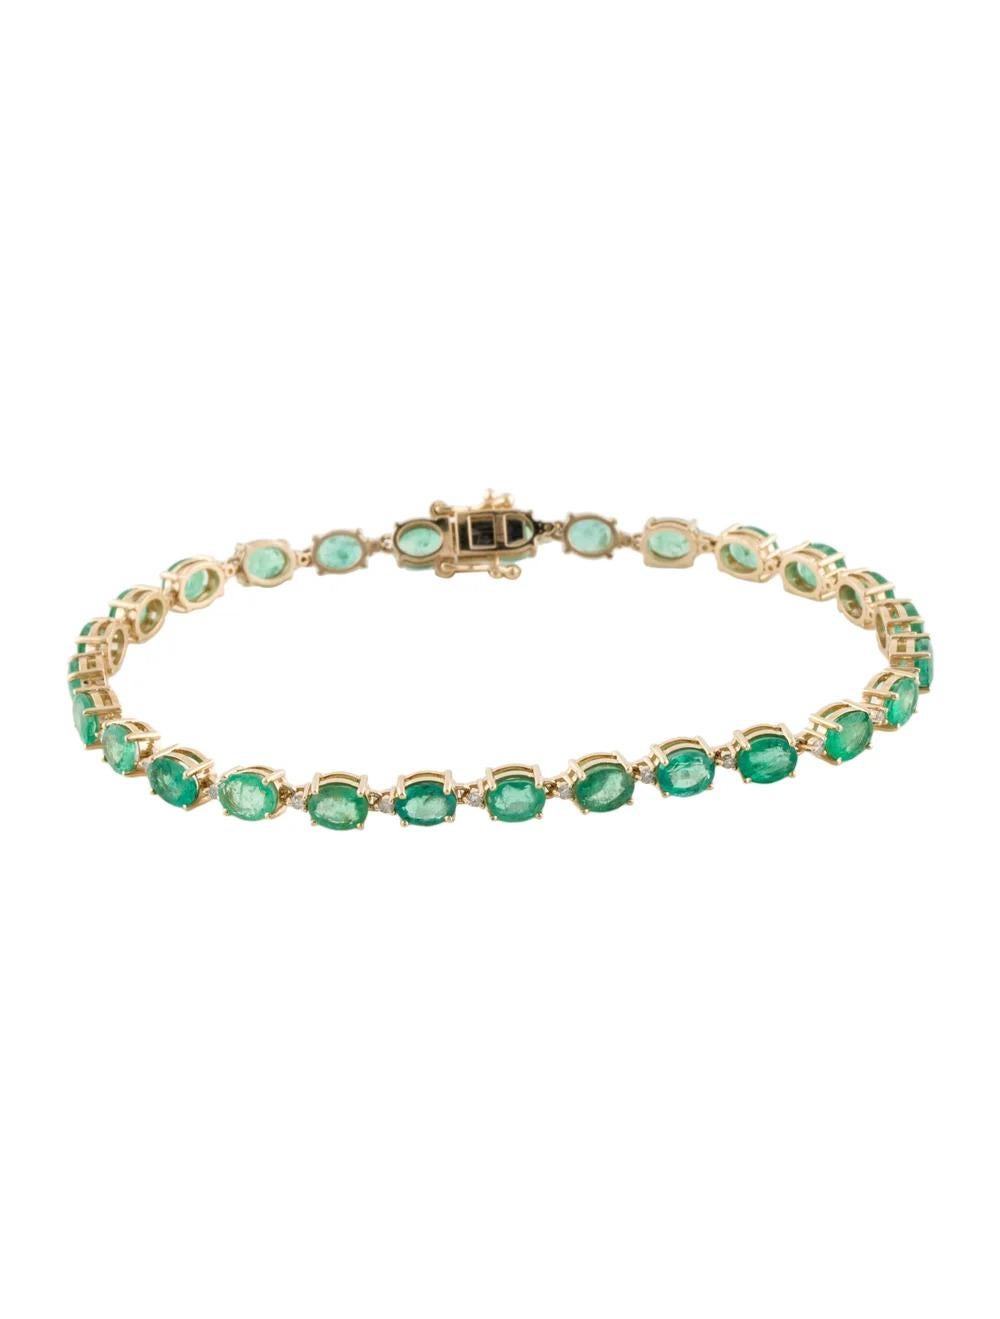 Introducing a stunning 14K Yellow Gold Bracelet adorned with a magnificent 7.73 Carat Faceted Oval Emerald, exuding elegance and charm. Crafted with precision and finesse, this exquisite piece is designed to captivate attention and elevate any